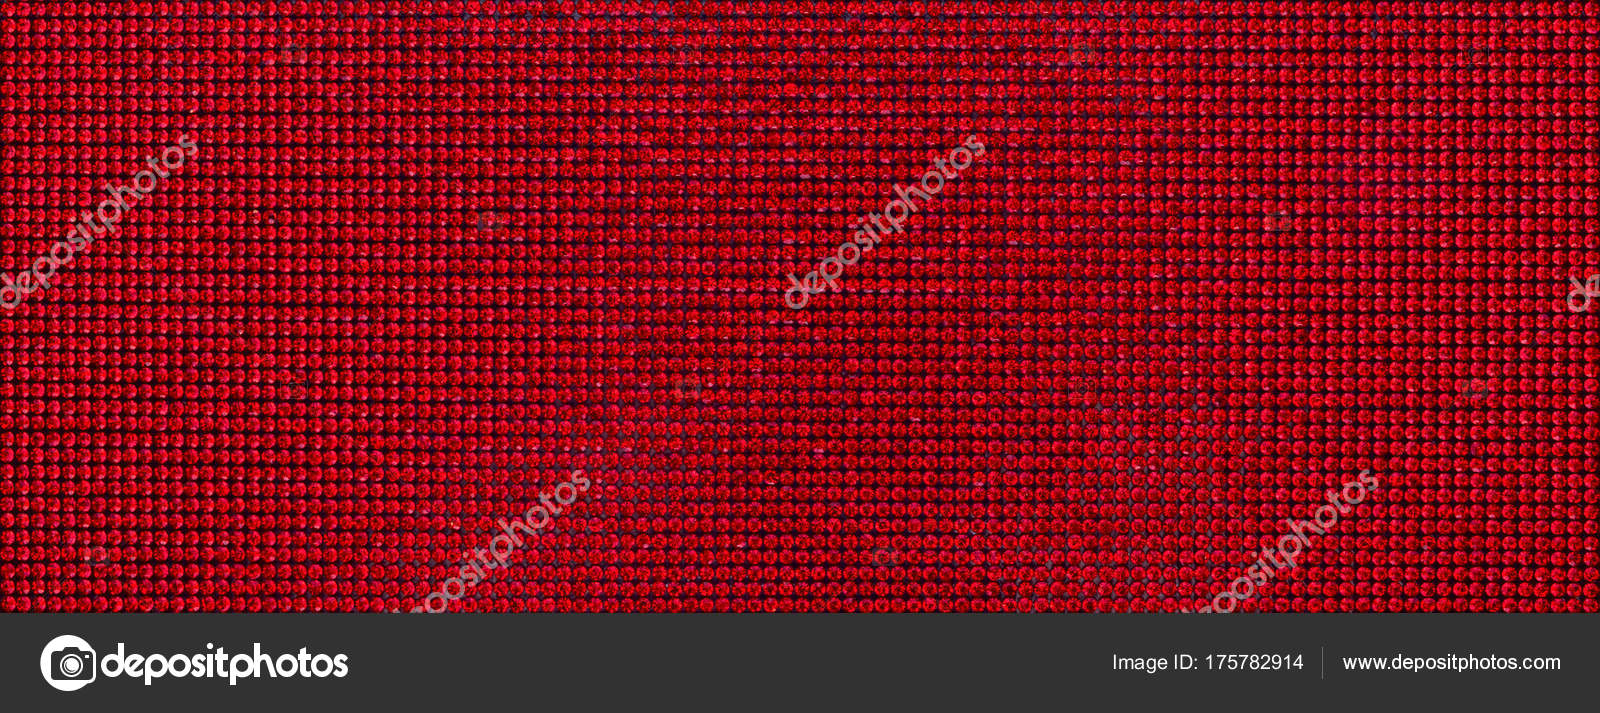 Canvas Of Red Rhinestones. Background Stock Photo, Picture and Royalty Free  Image. Image 77494520.